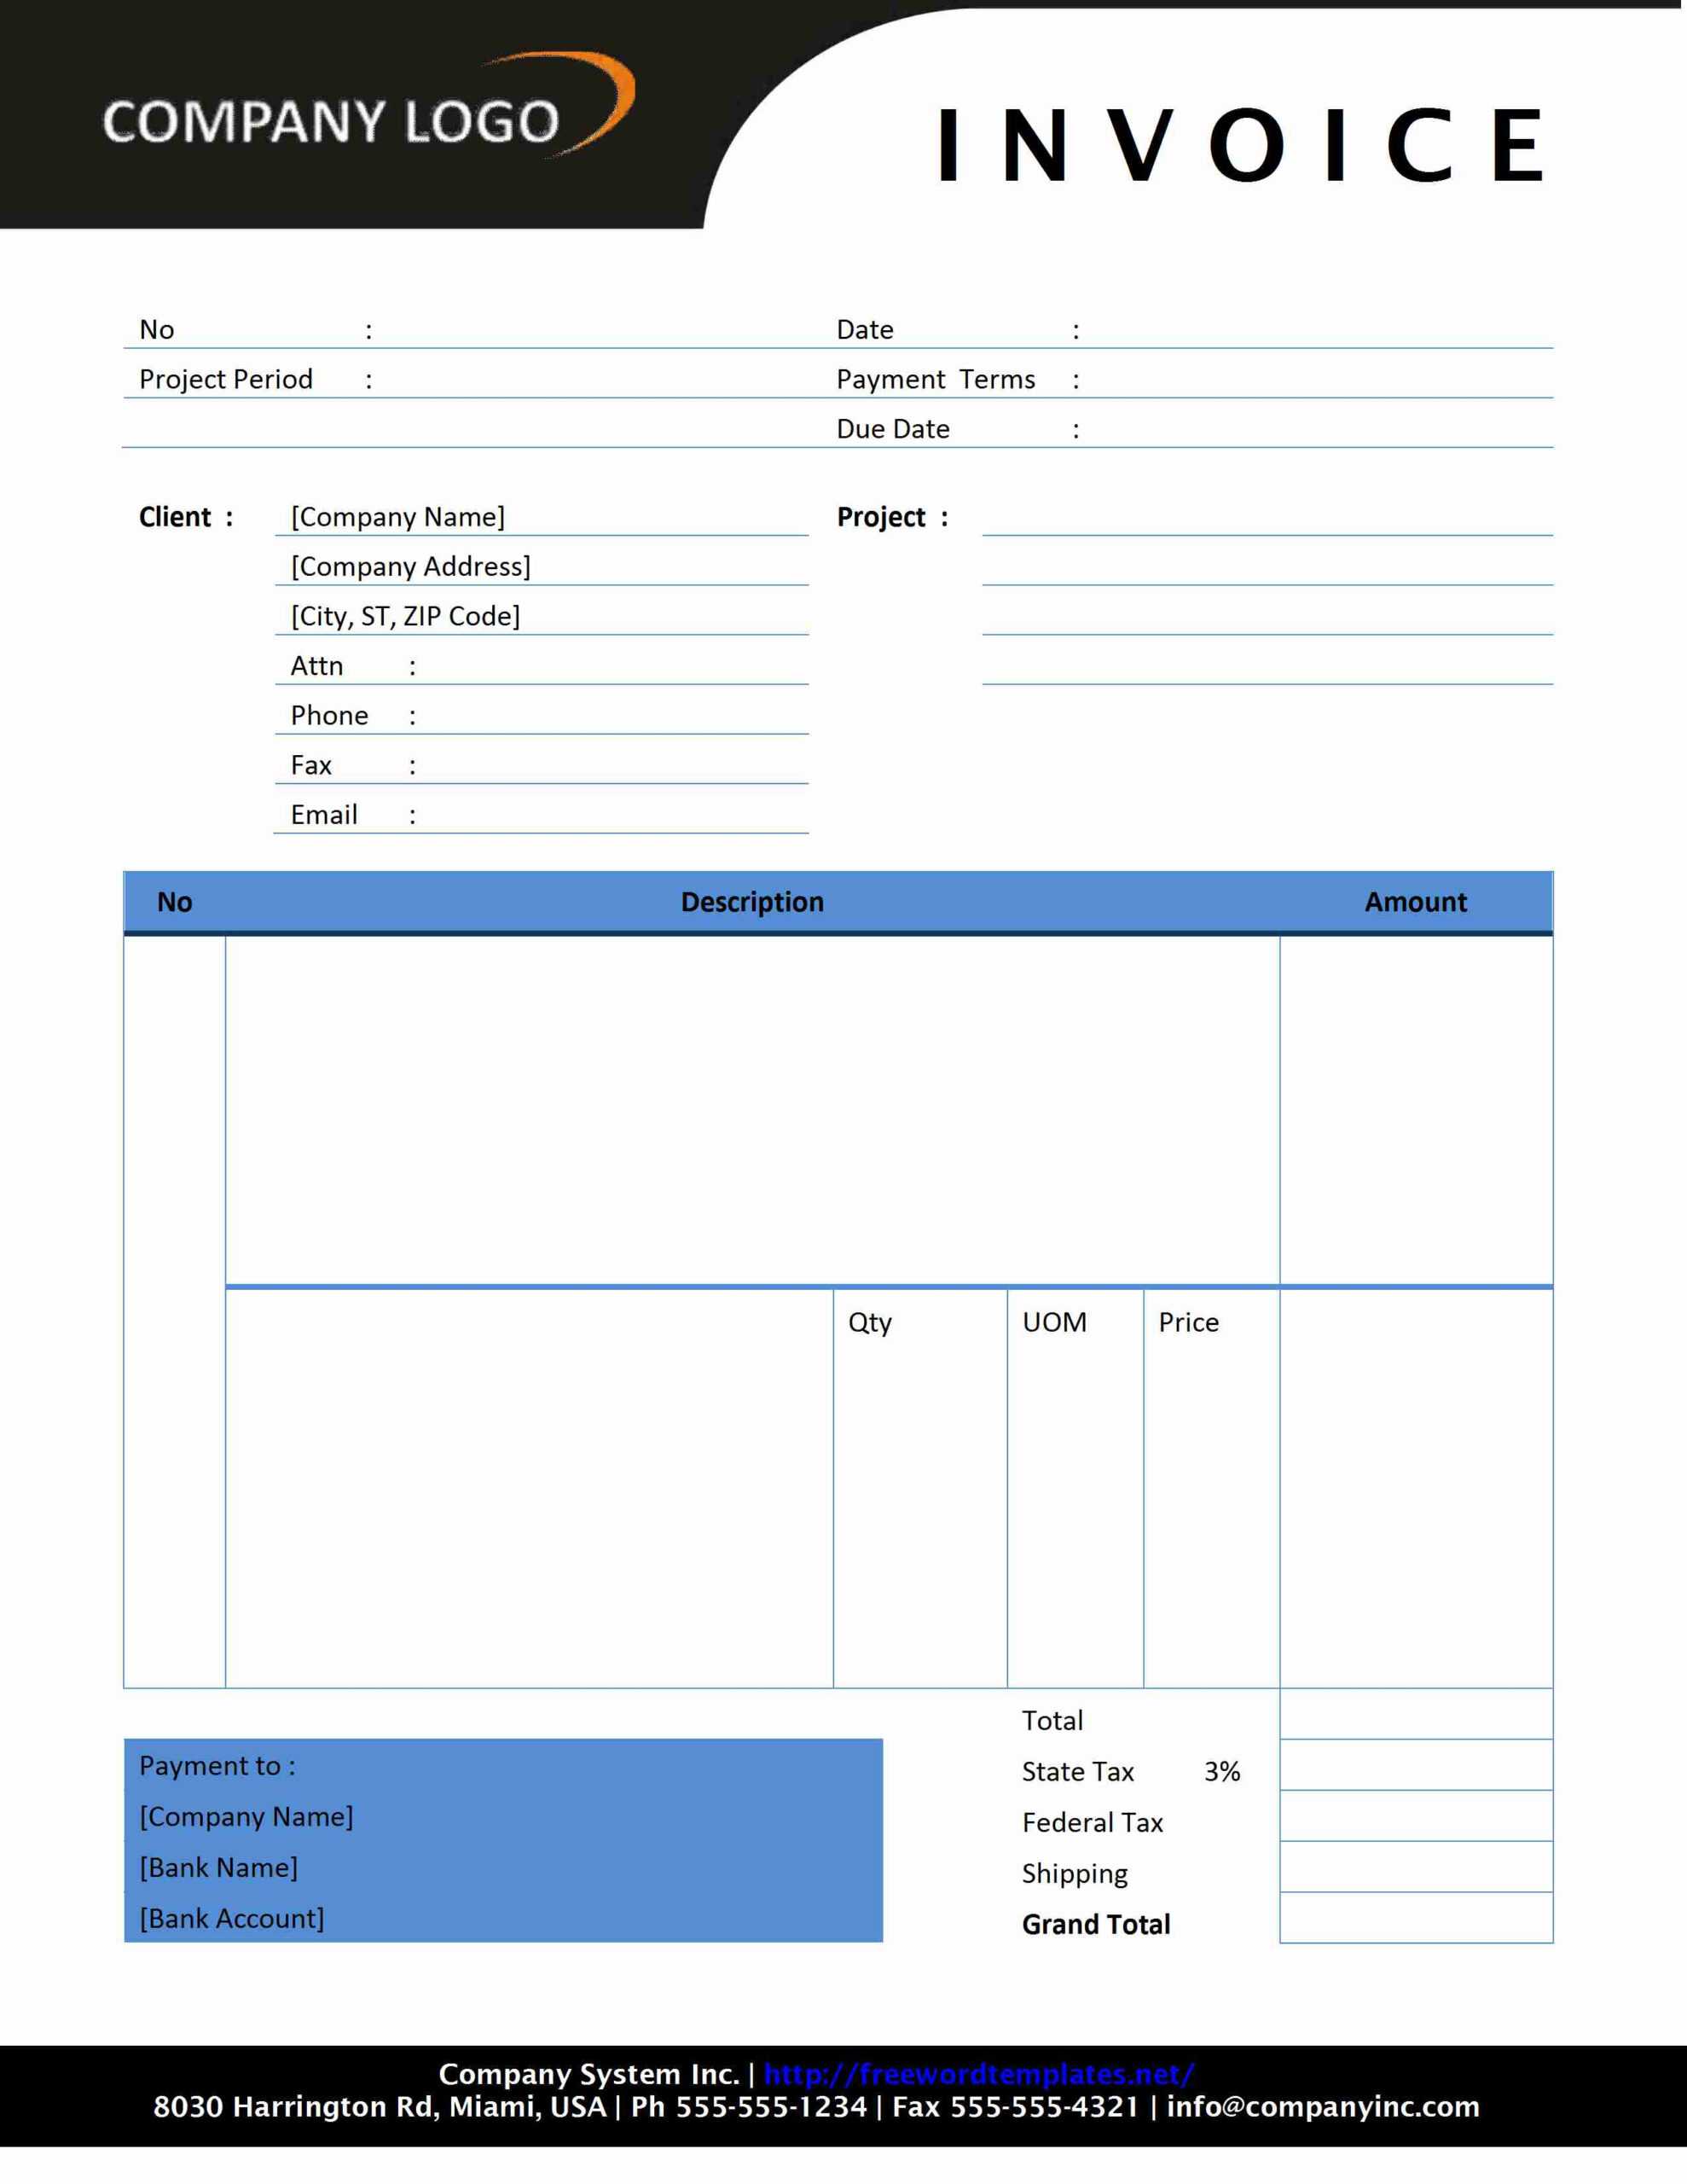 Invoice Template Word Mac | Invoice Example In Free Invoice Template Word Mac